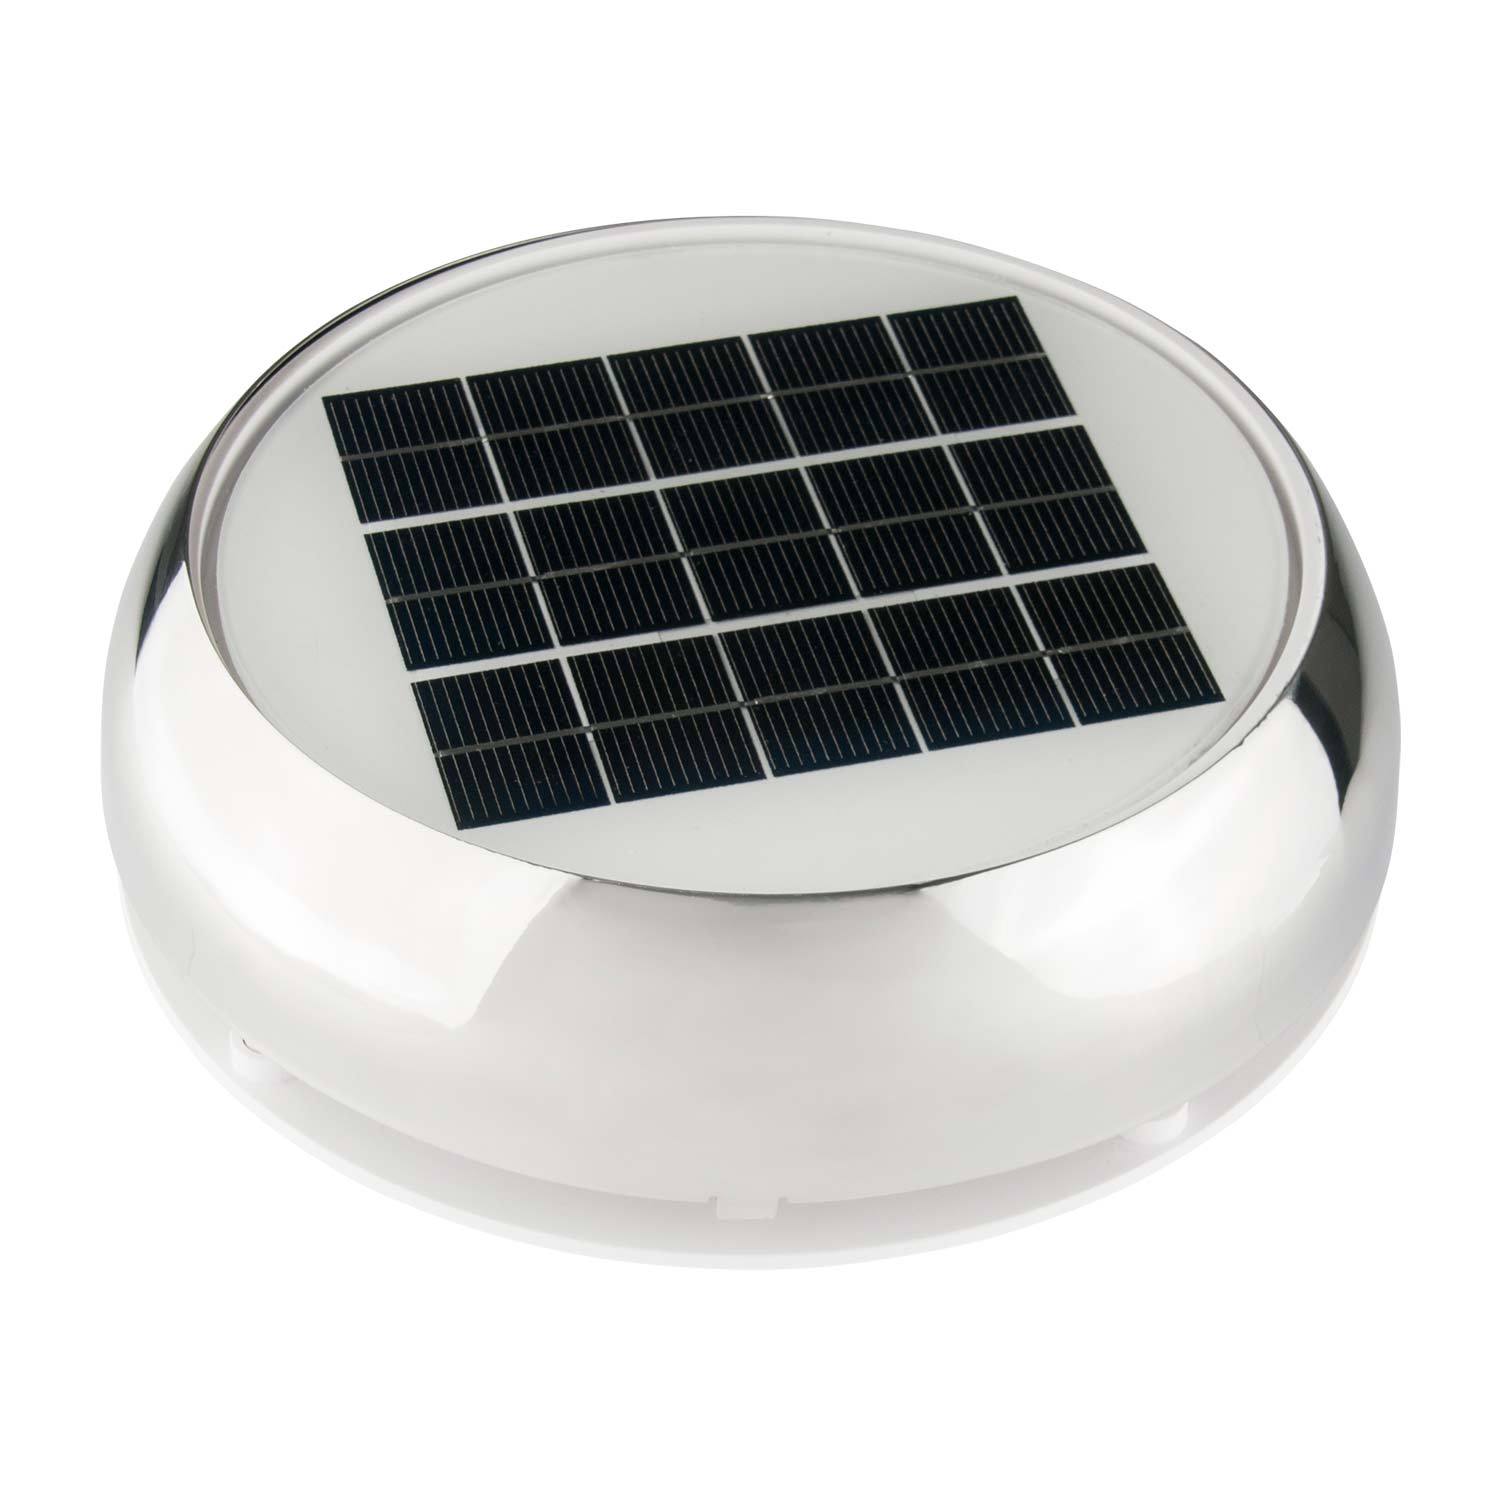 MARINCO 4 Stainless Steel Day/Night Solar Nicro Vent